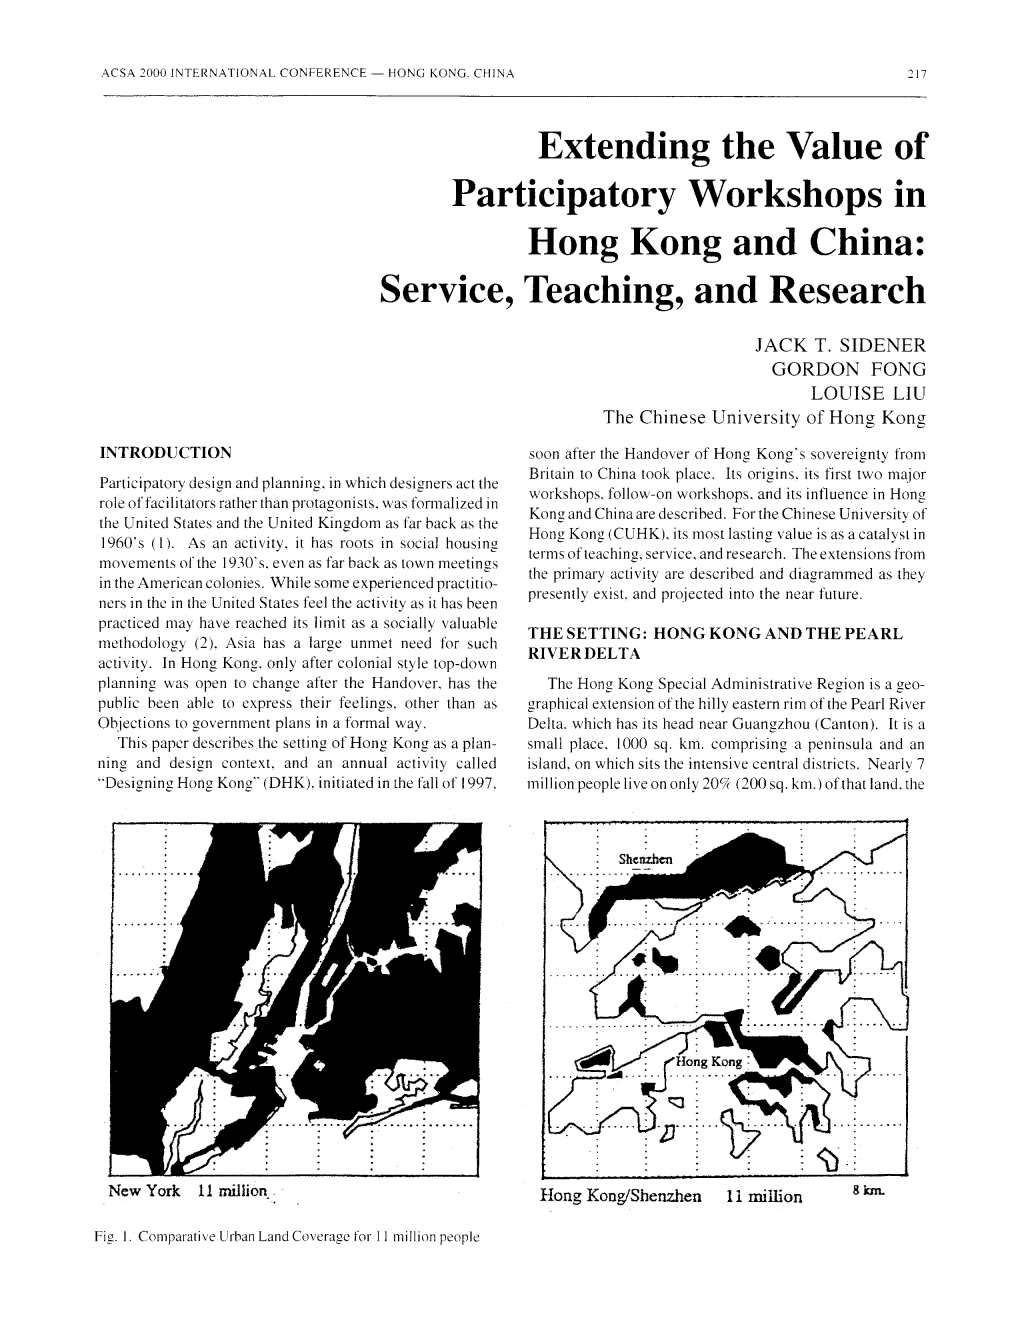 Extending the Value of Participatory Workshops in Hong Kong and China: Service, Teaching, and Research